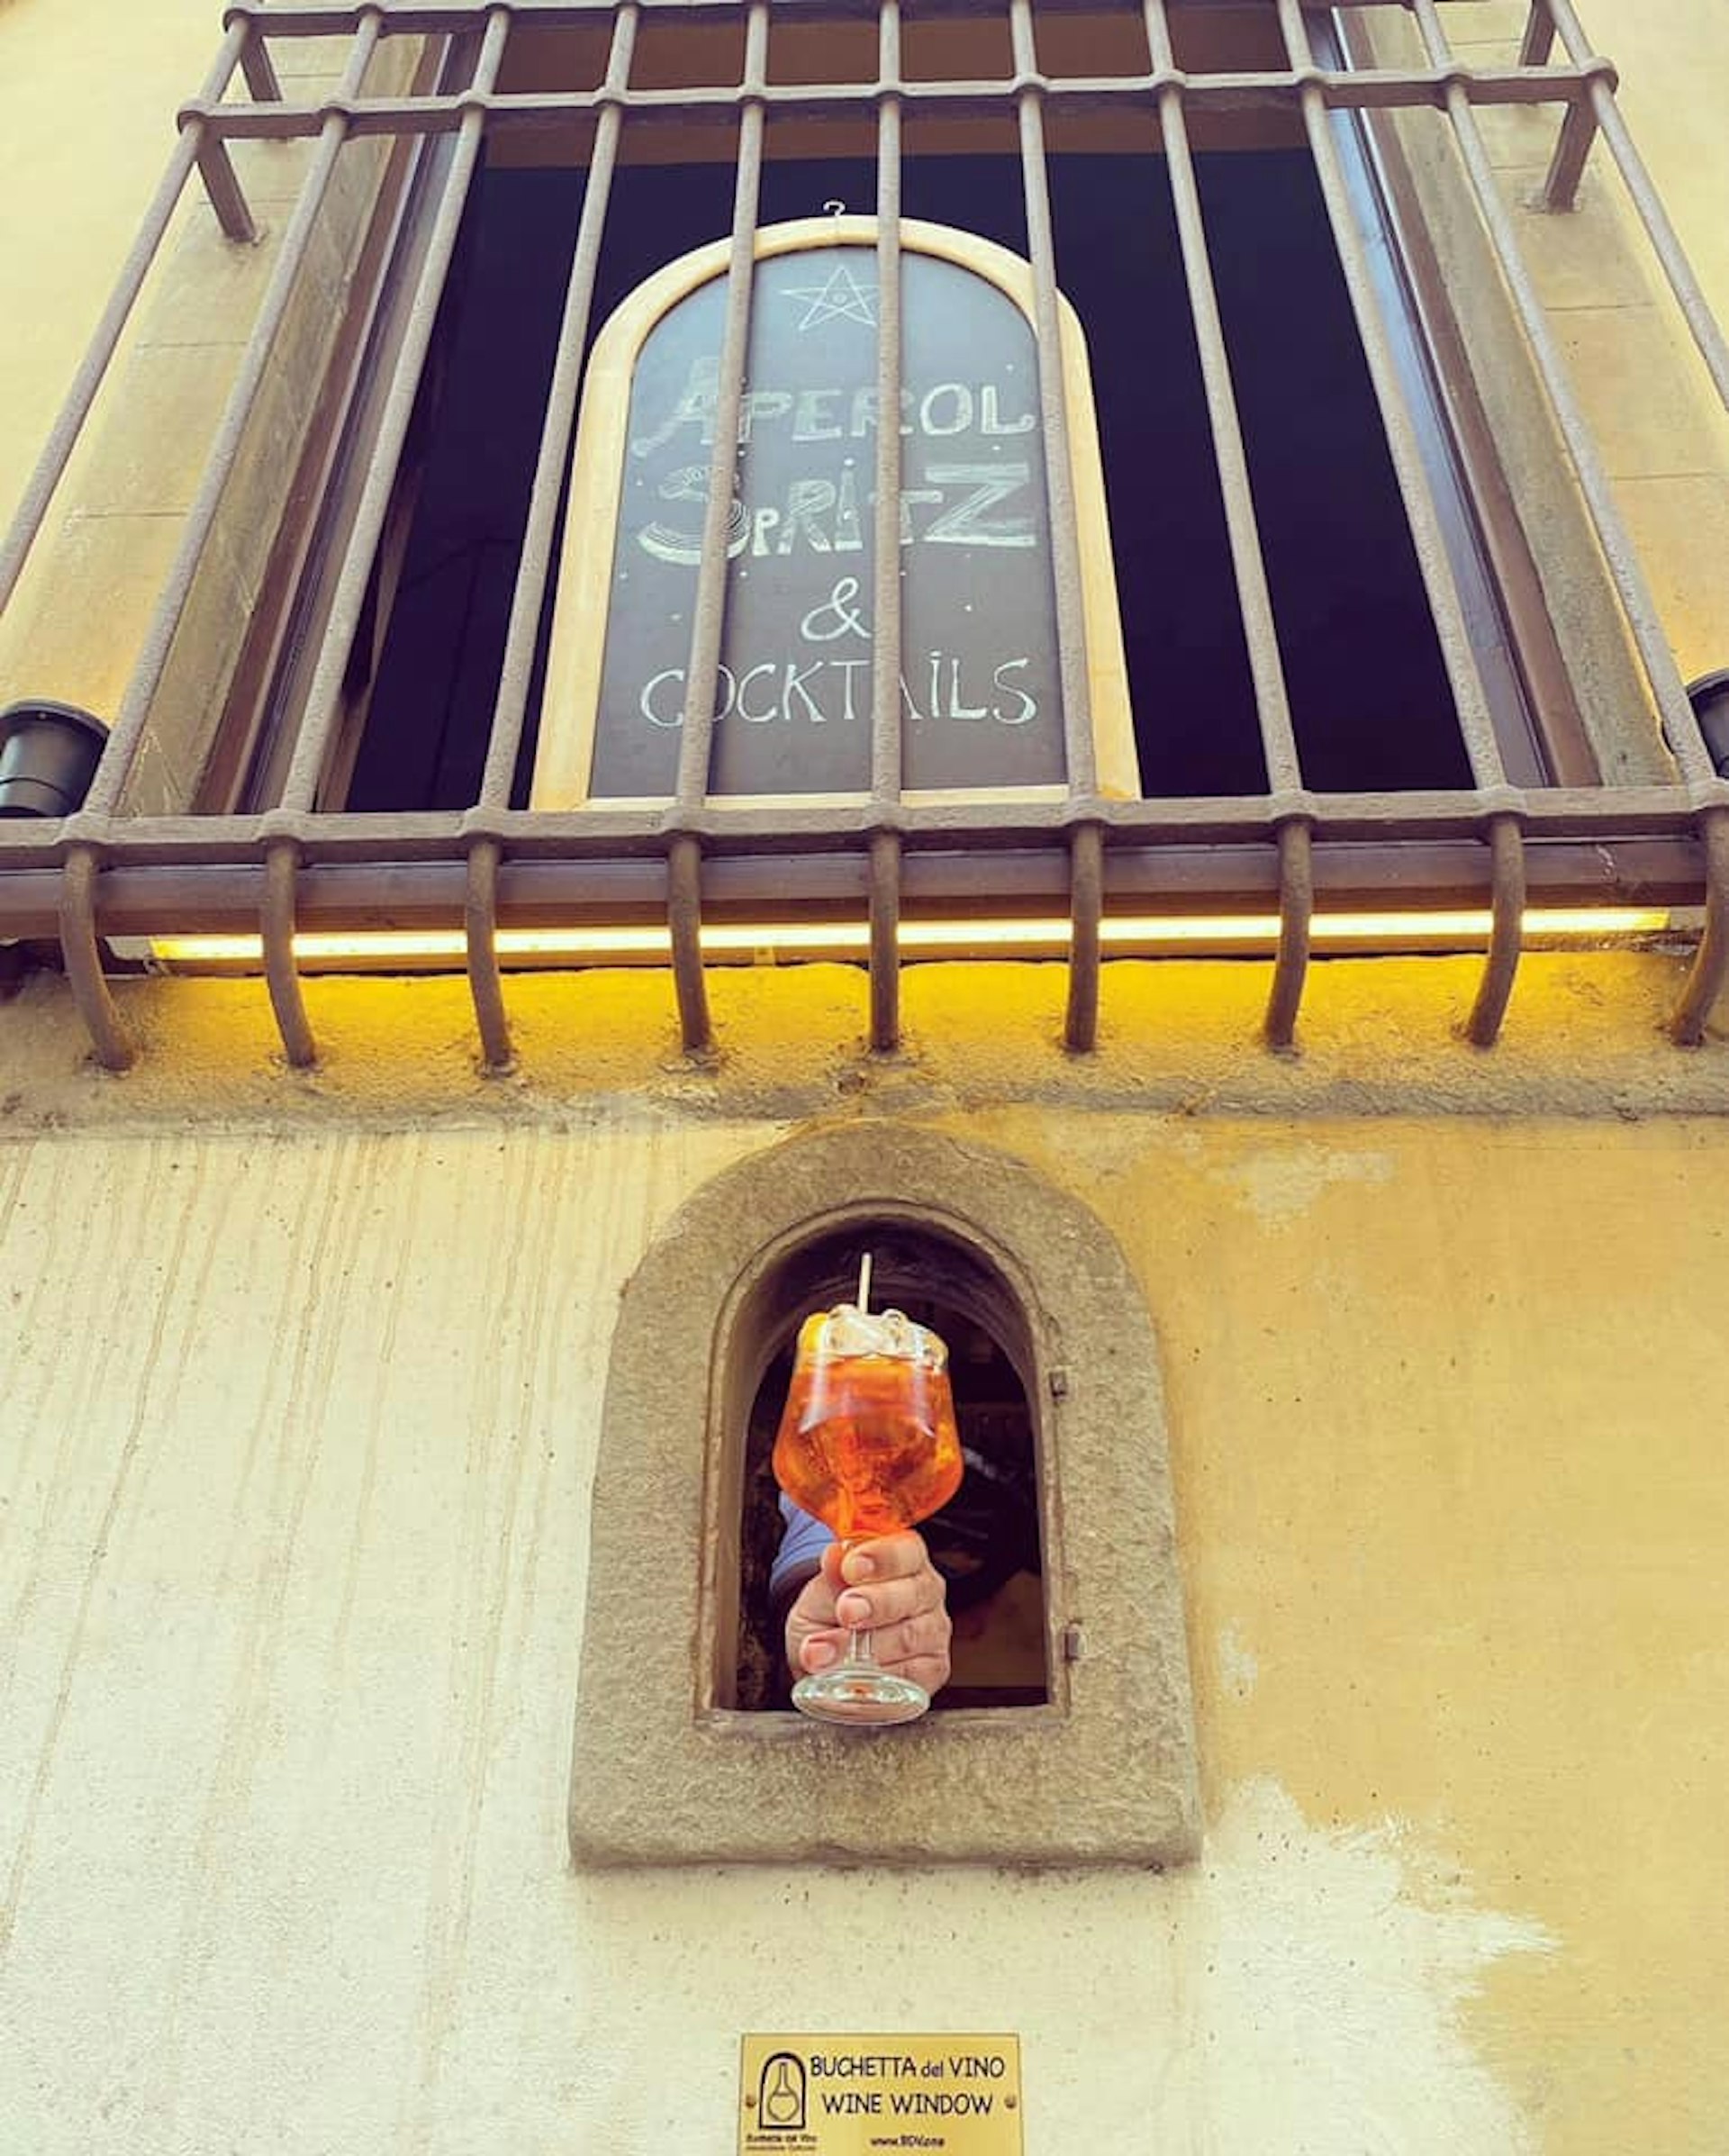 An Aperol Spritz is passed through a wine window in Florence